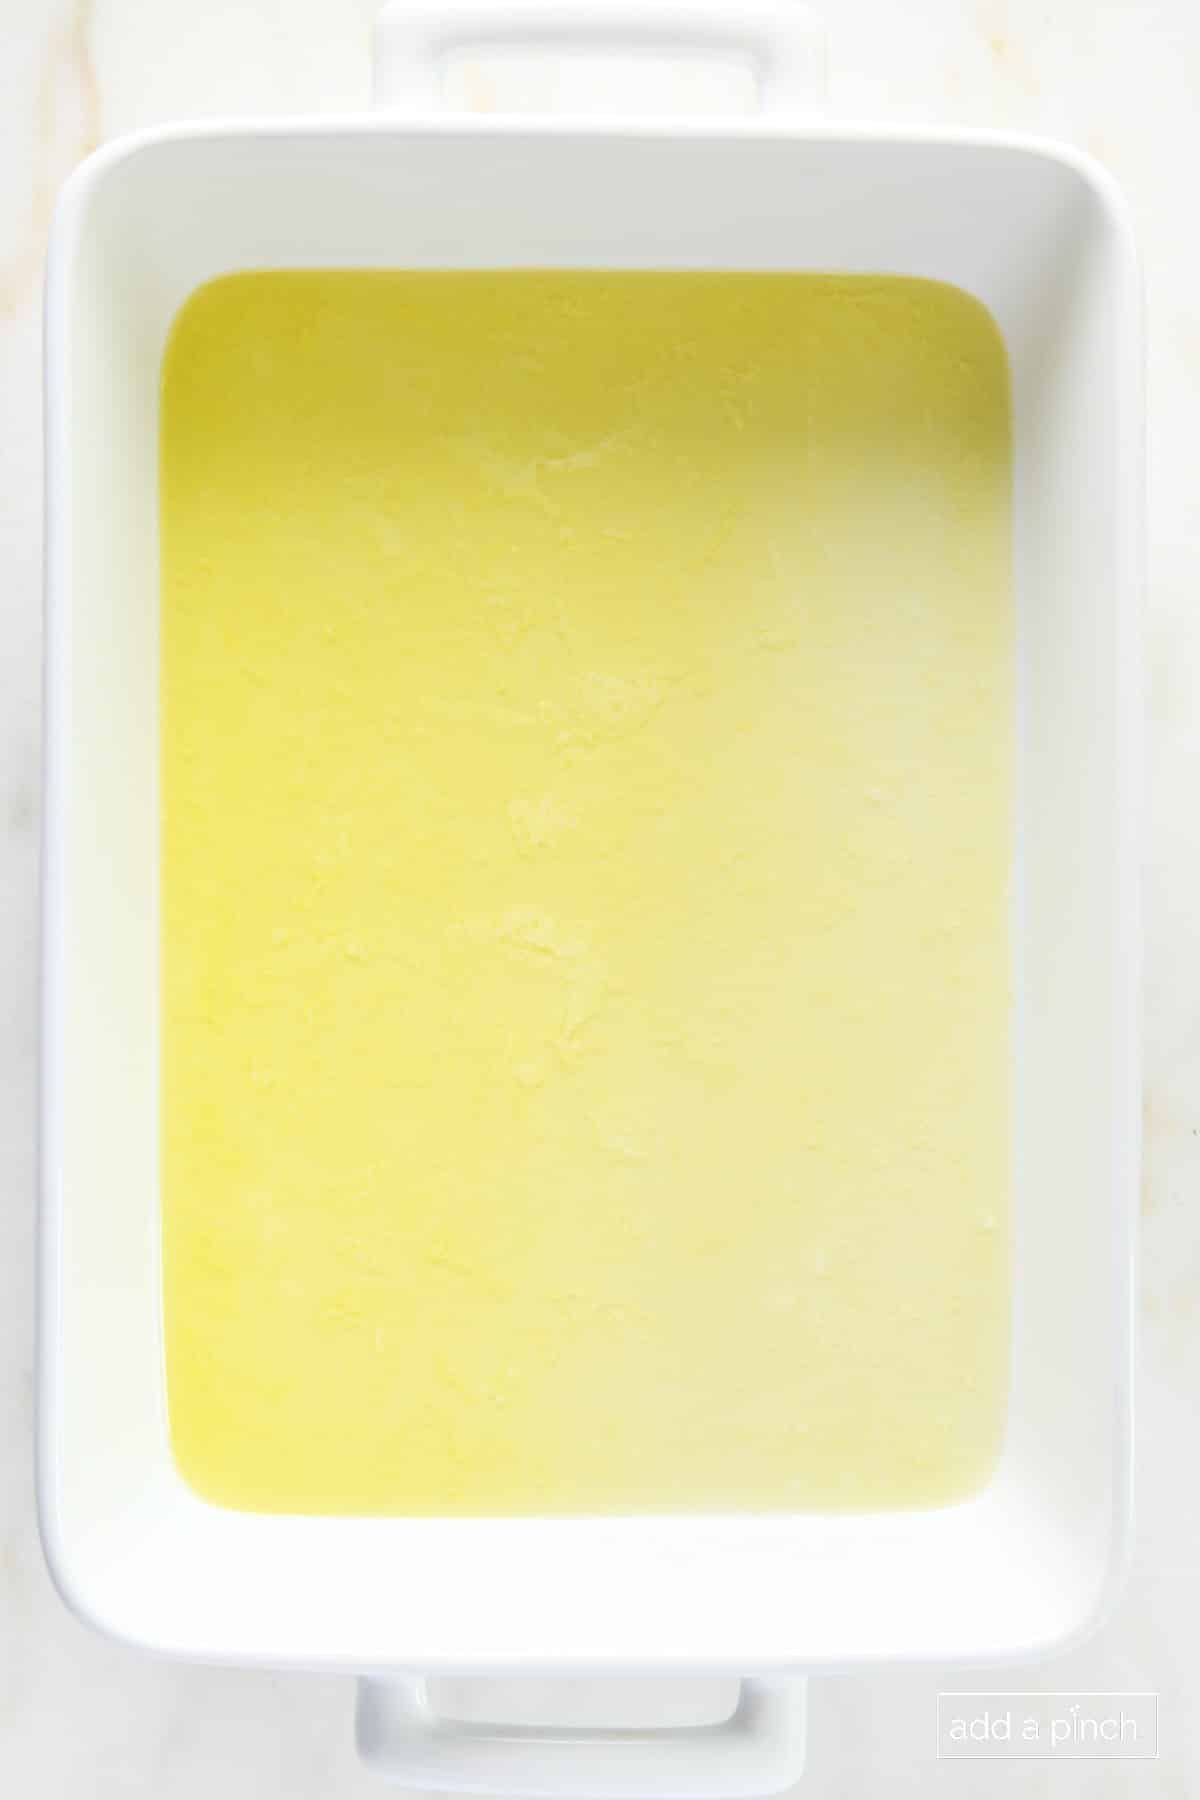 Melted butter in a white baking dish.